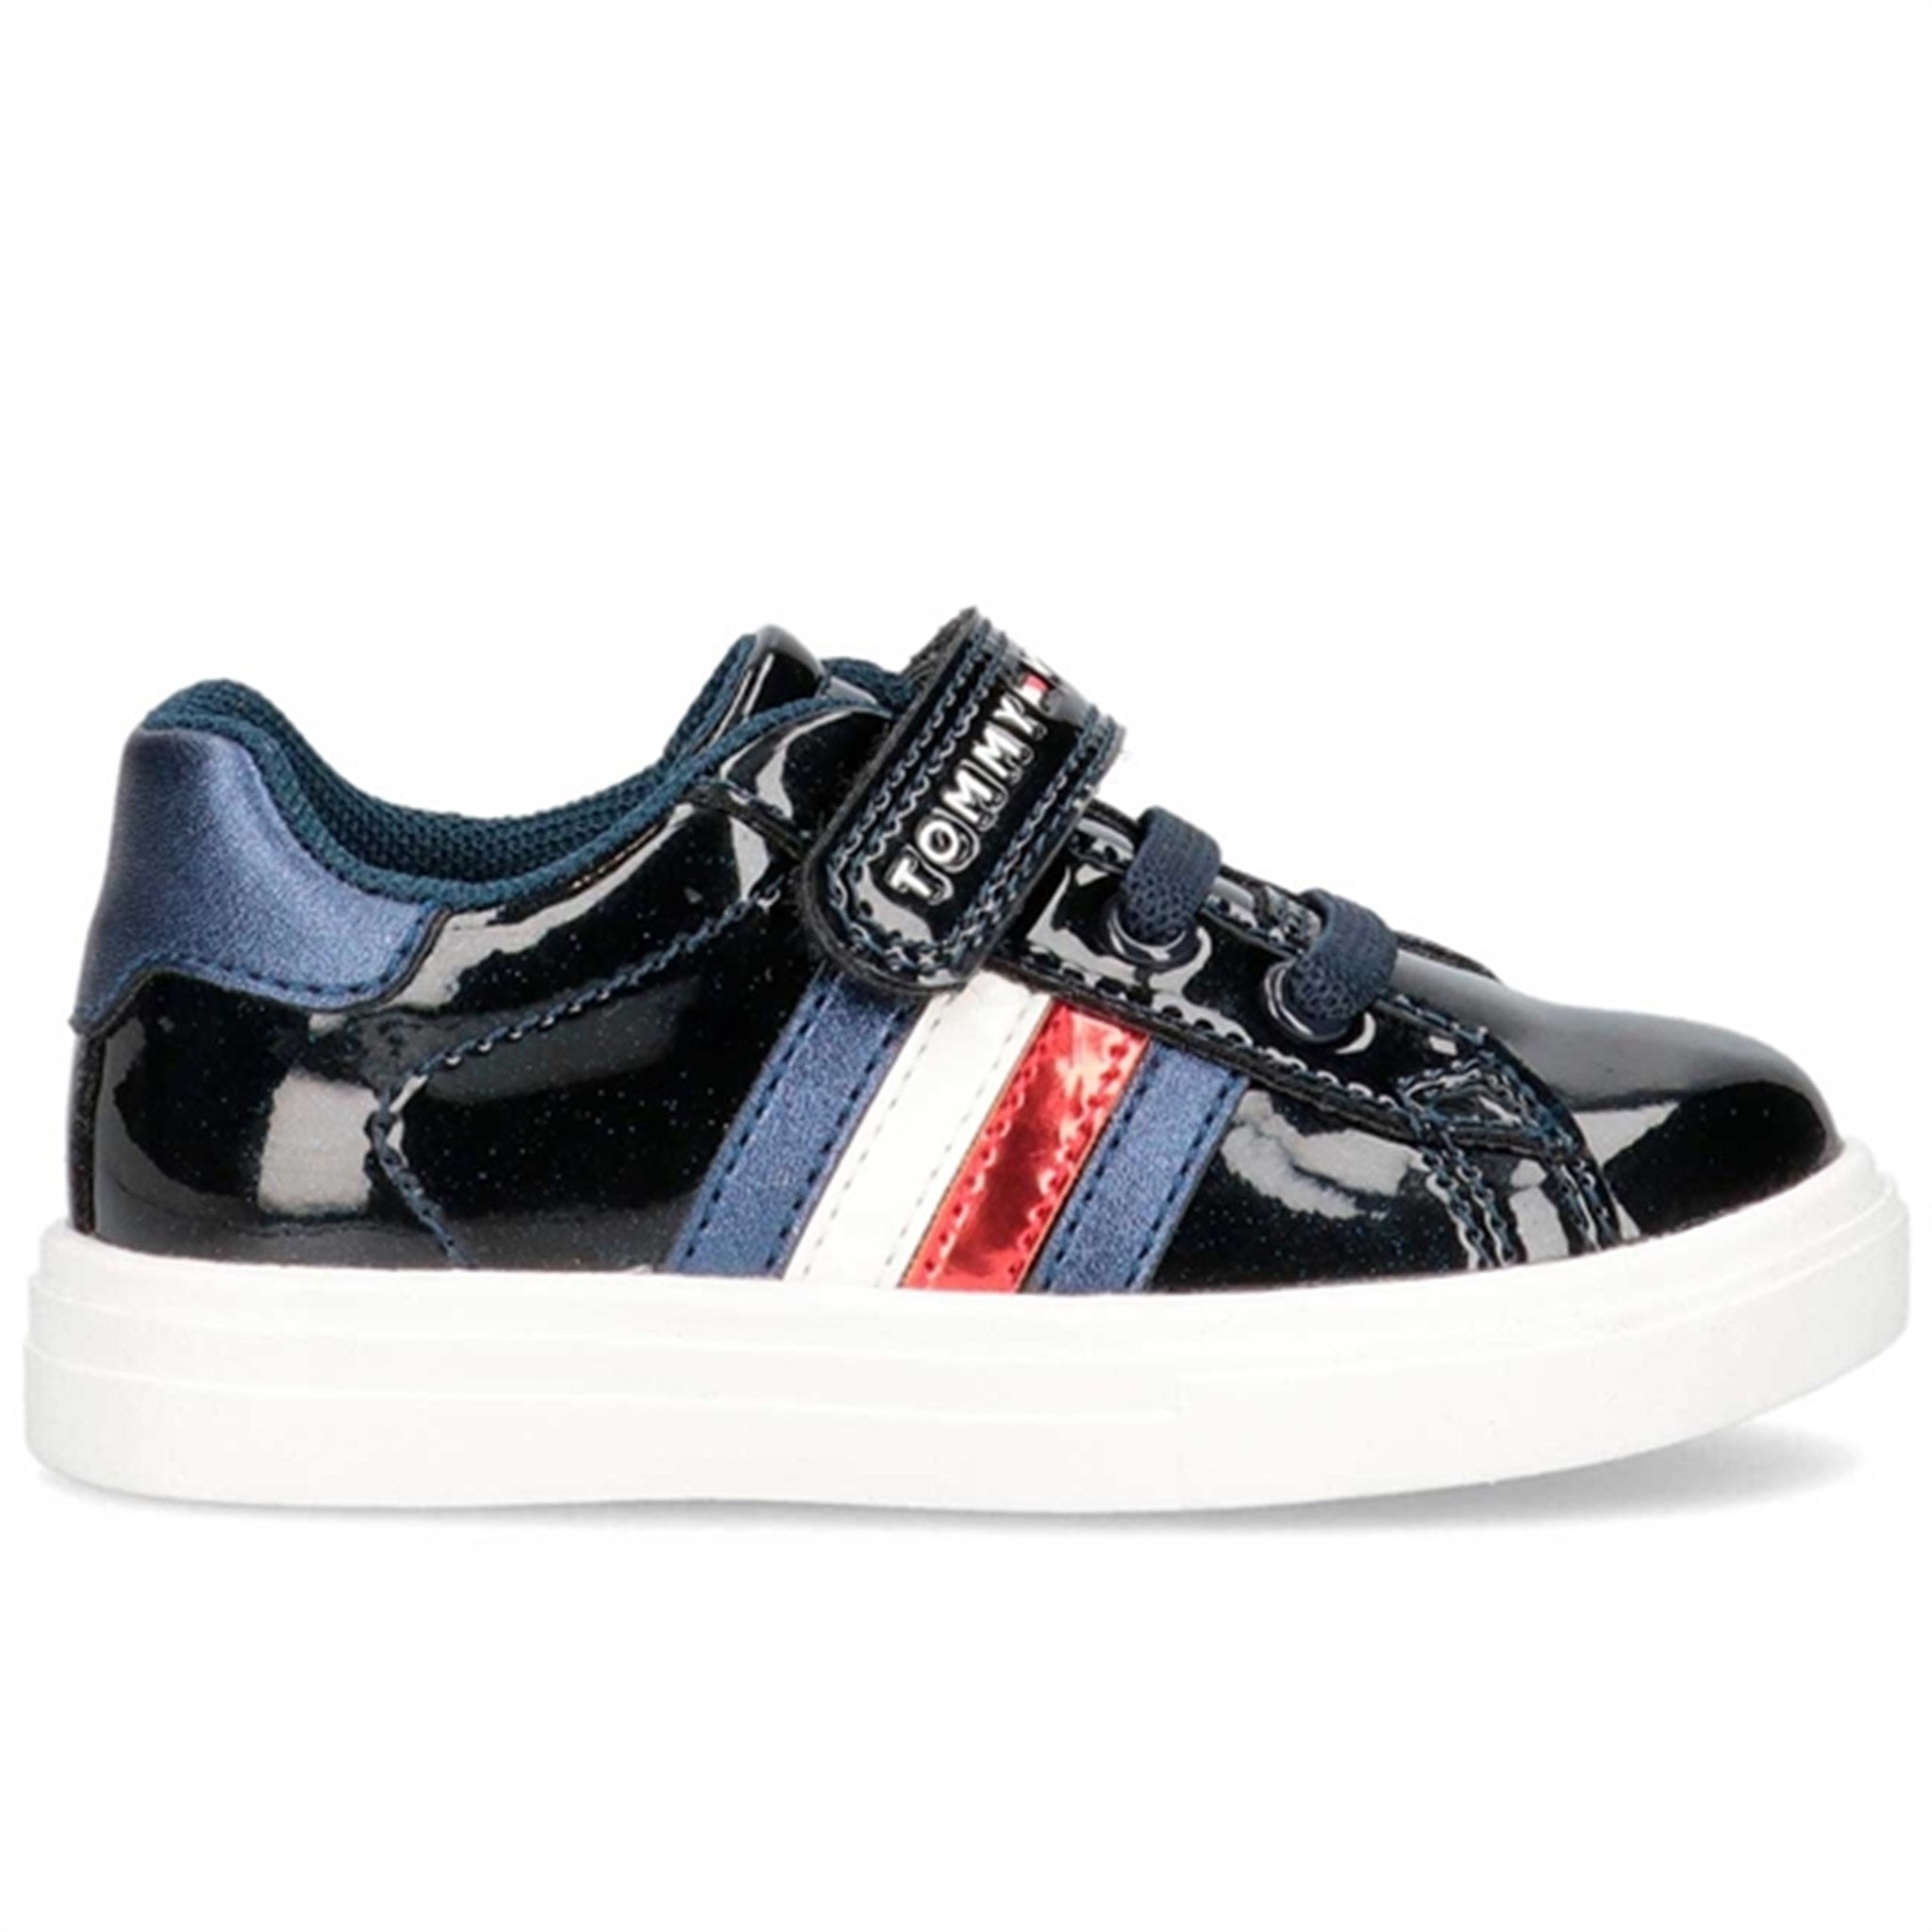 Tommy Hilfiger Low Cut Lace Up/Velcro Sneakers Blue 5